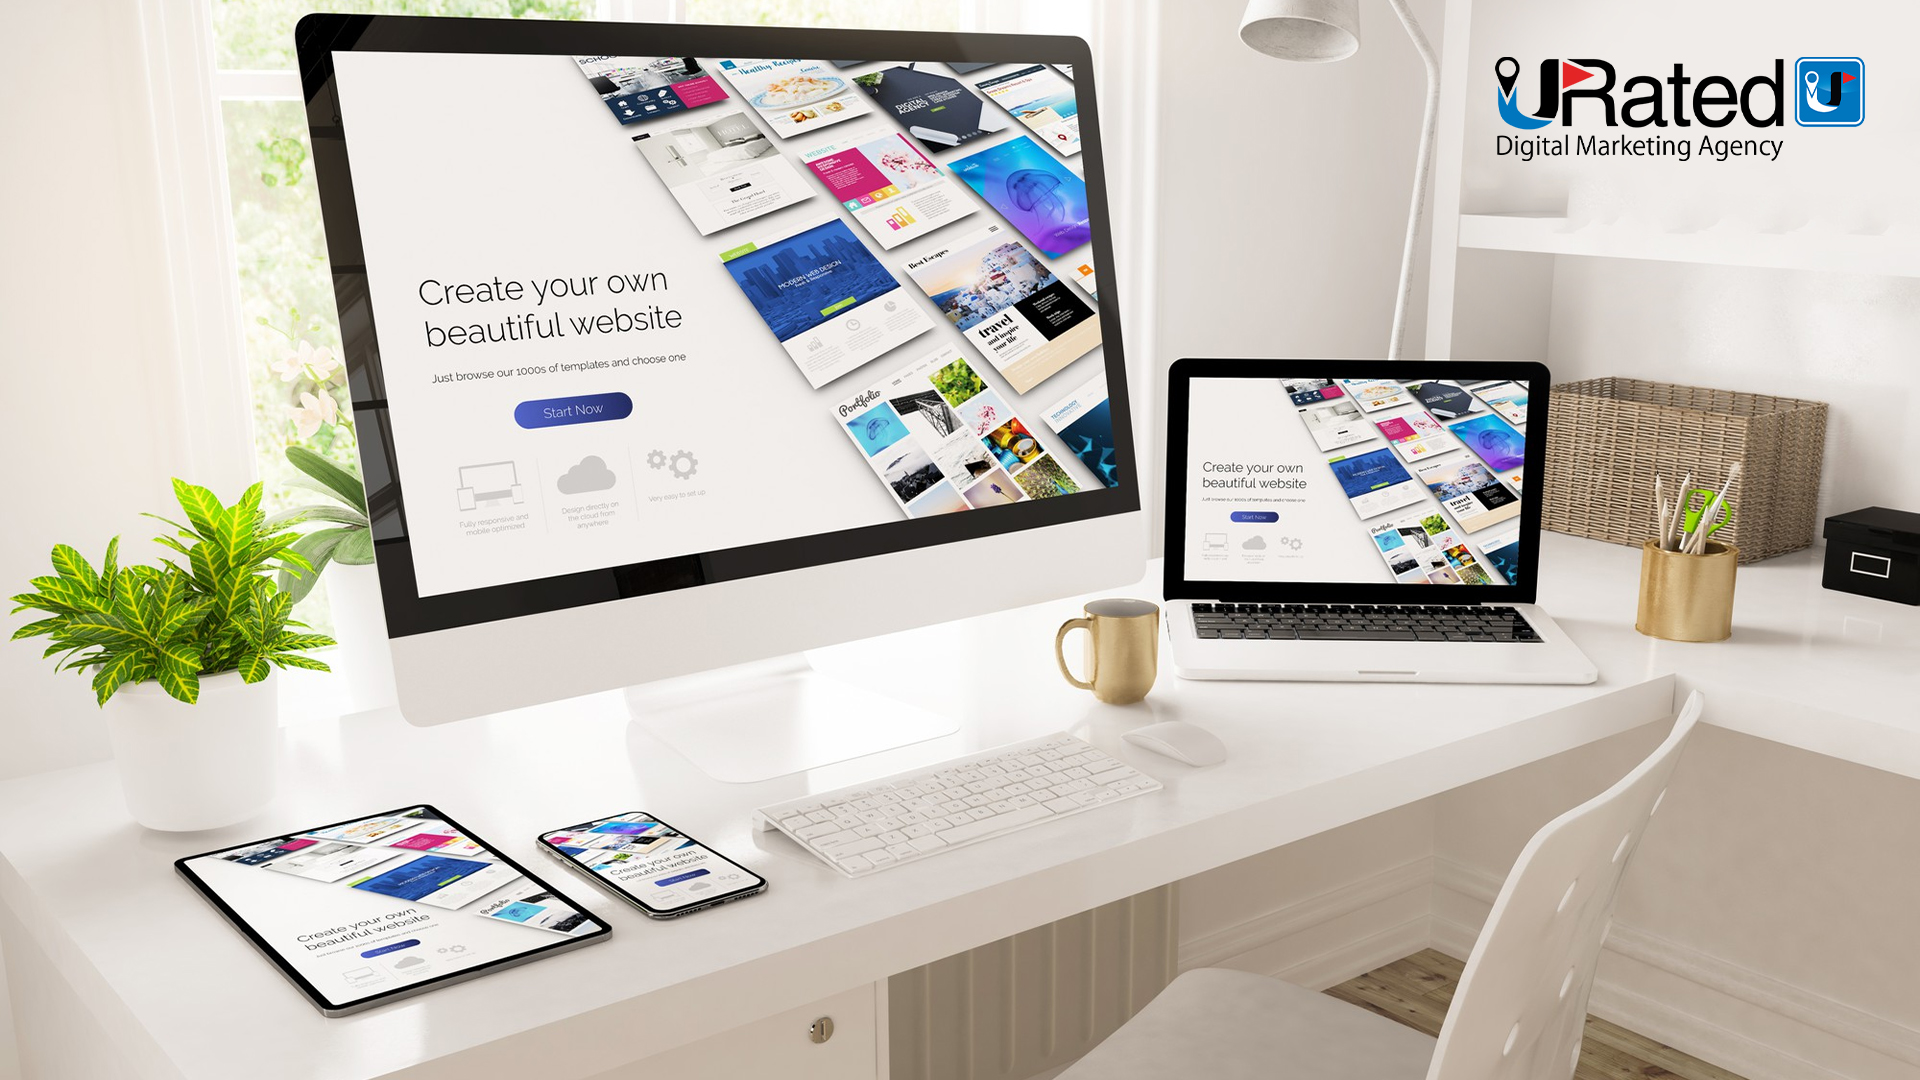 Do You Want A Successful Website? URated Web Design Services Will Help